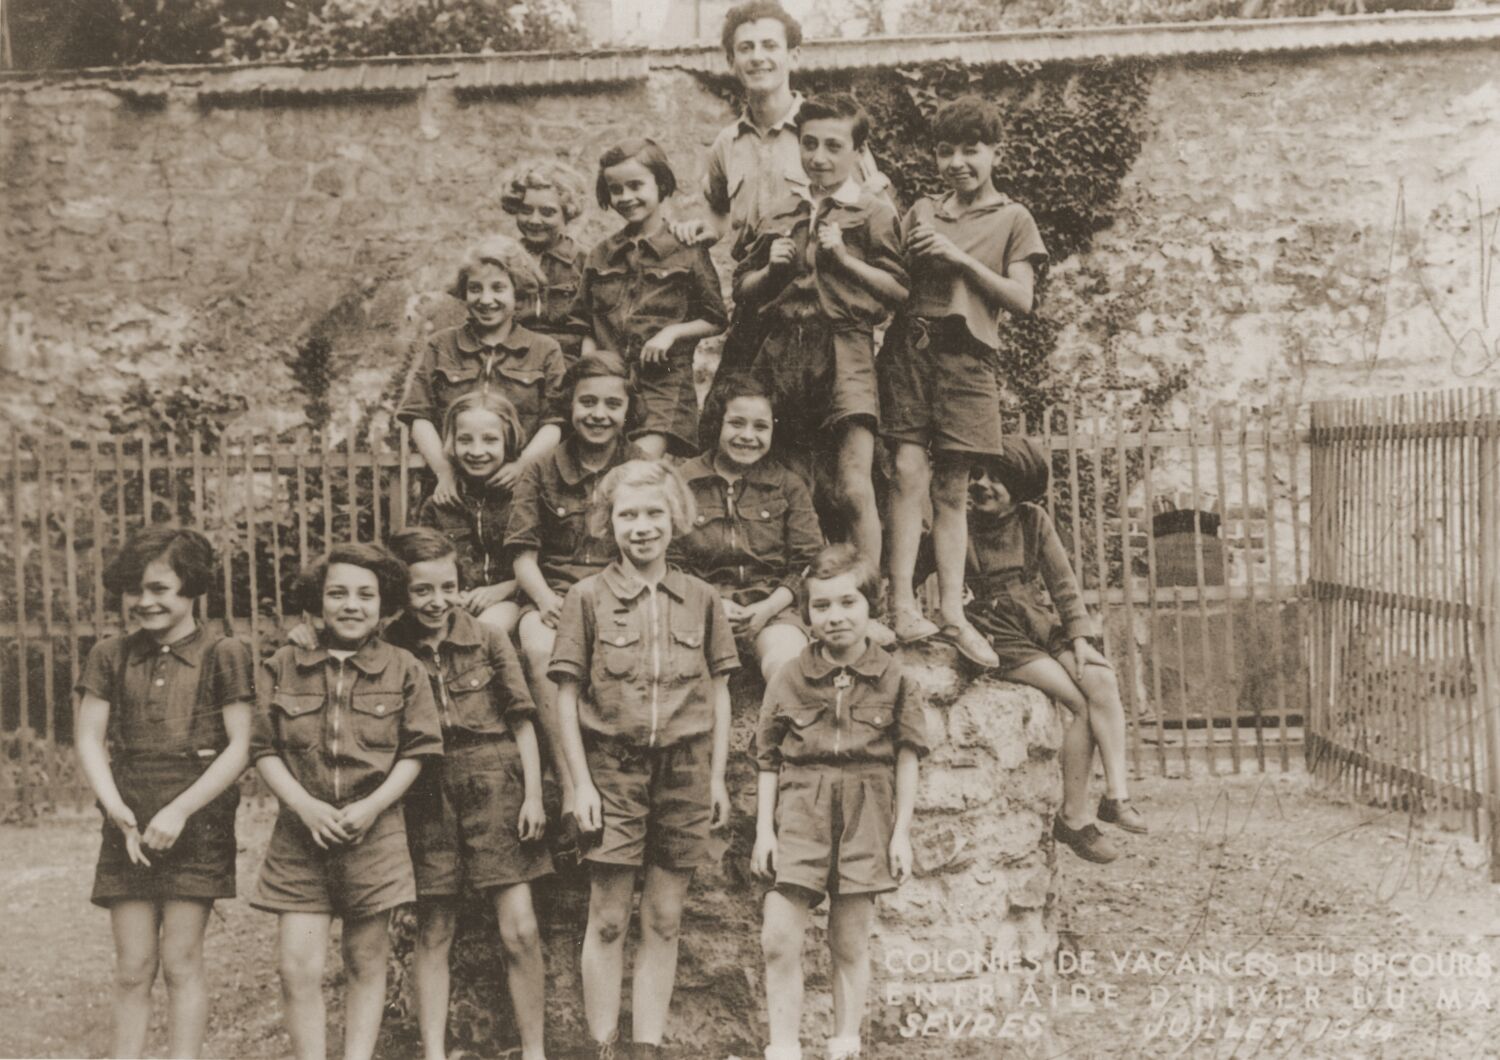 A group of children looking happy and mischievous, standing against and on top of a rocky platform outside with an adult.